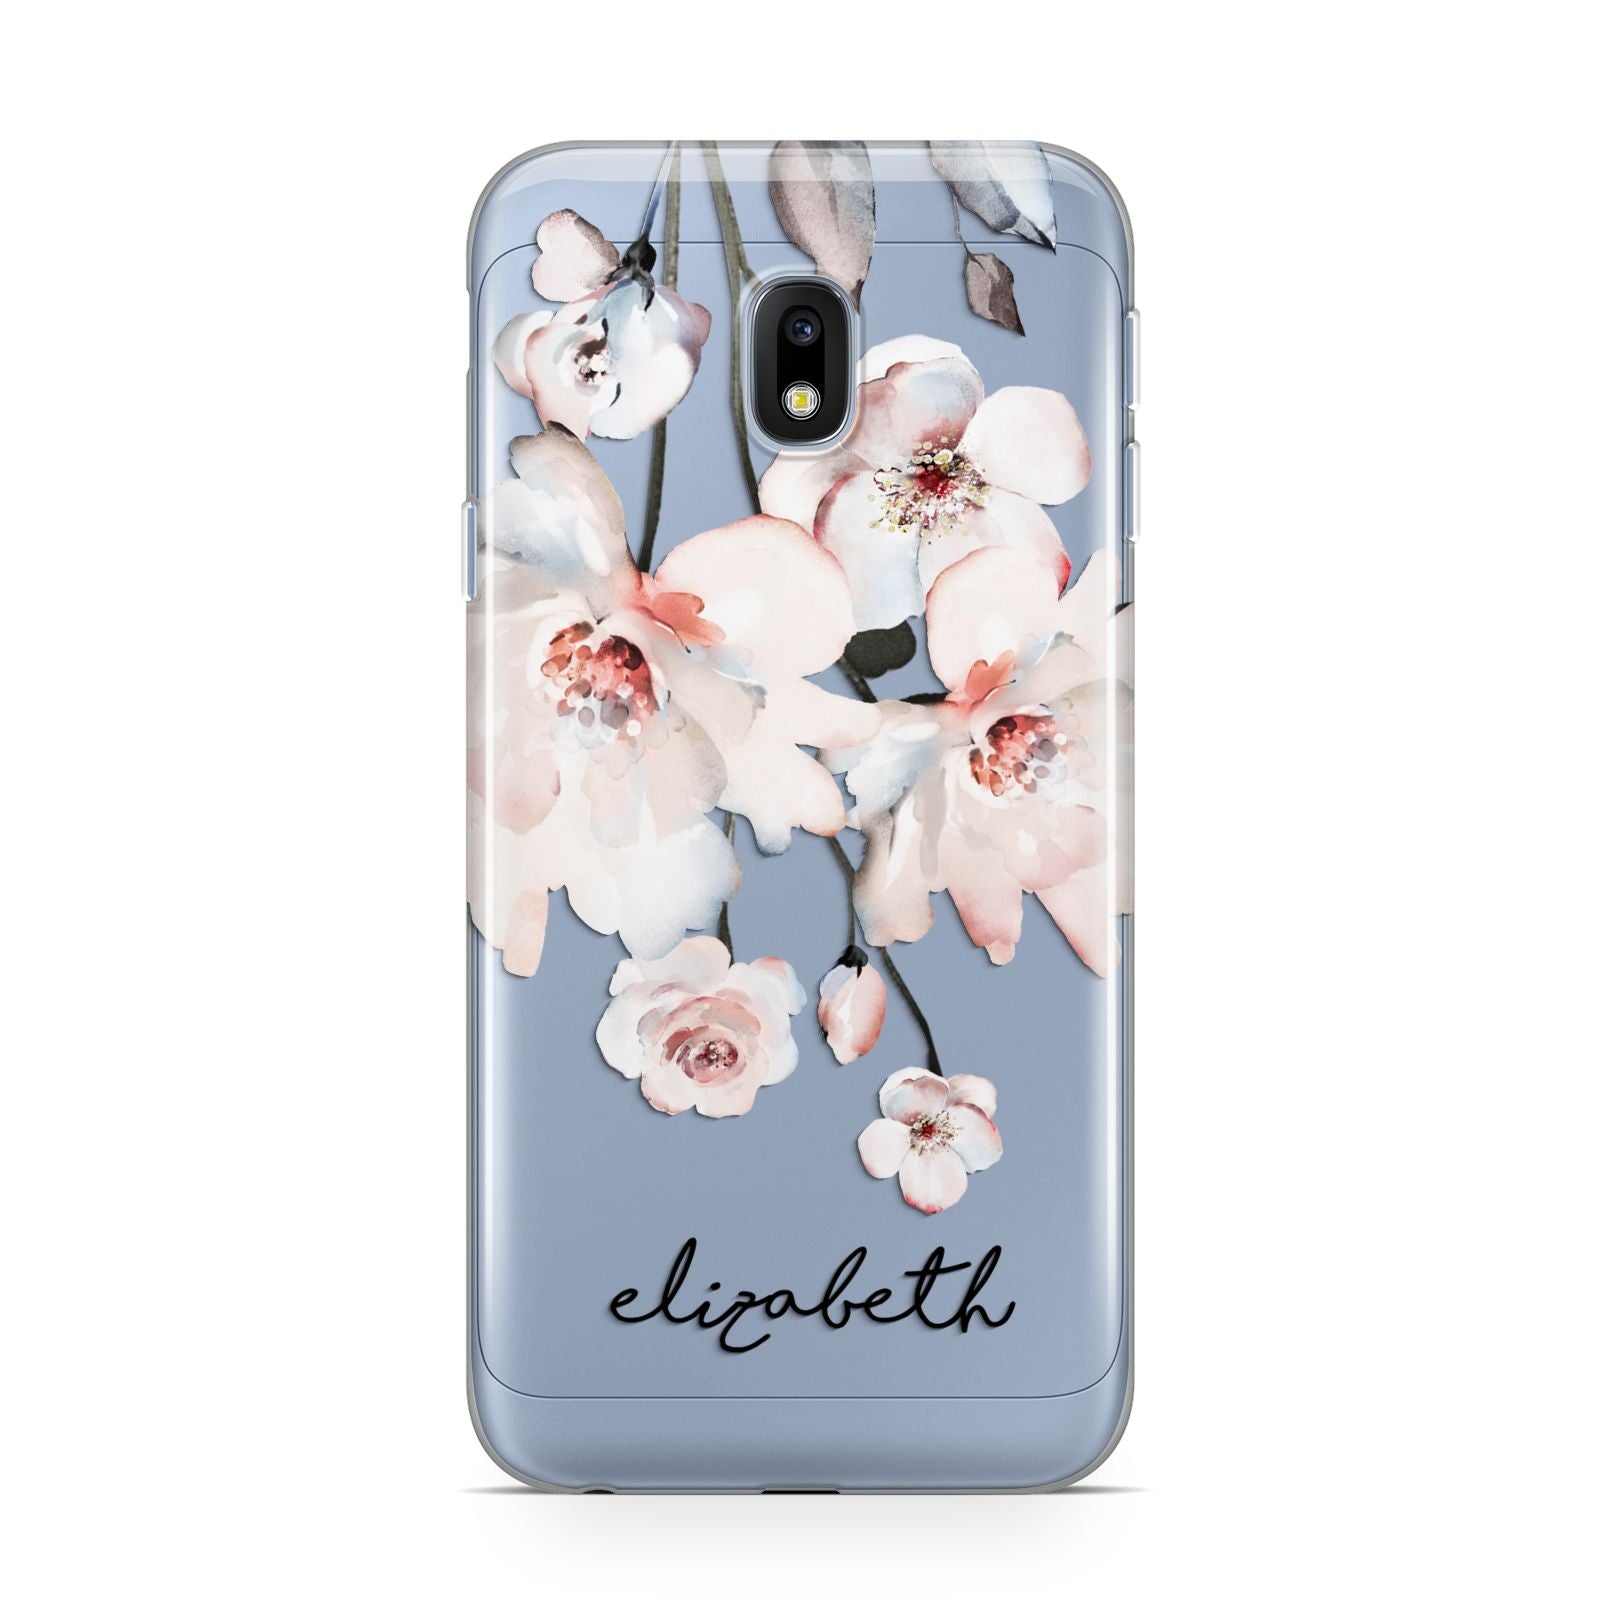 Personalised Name Roses Watercolour Samsung Galaxy J3 2017 Case